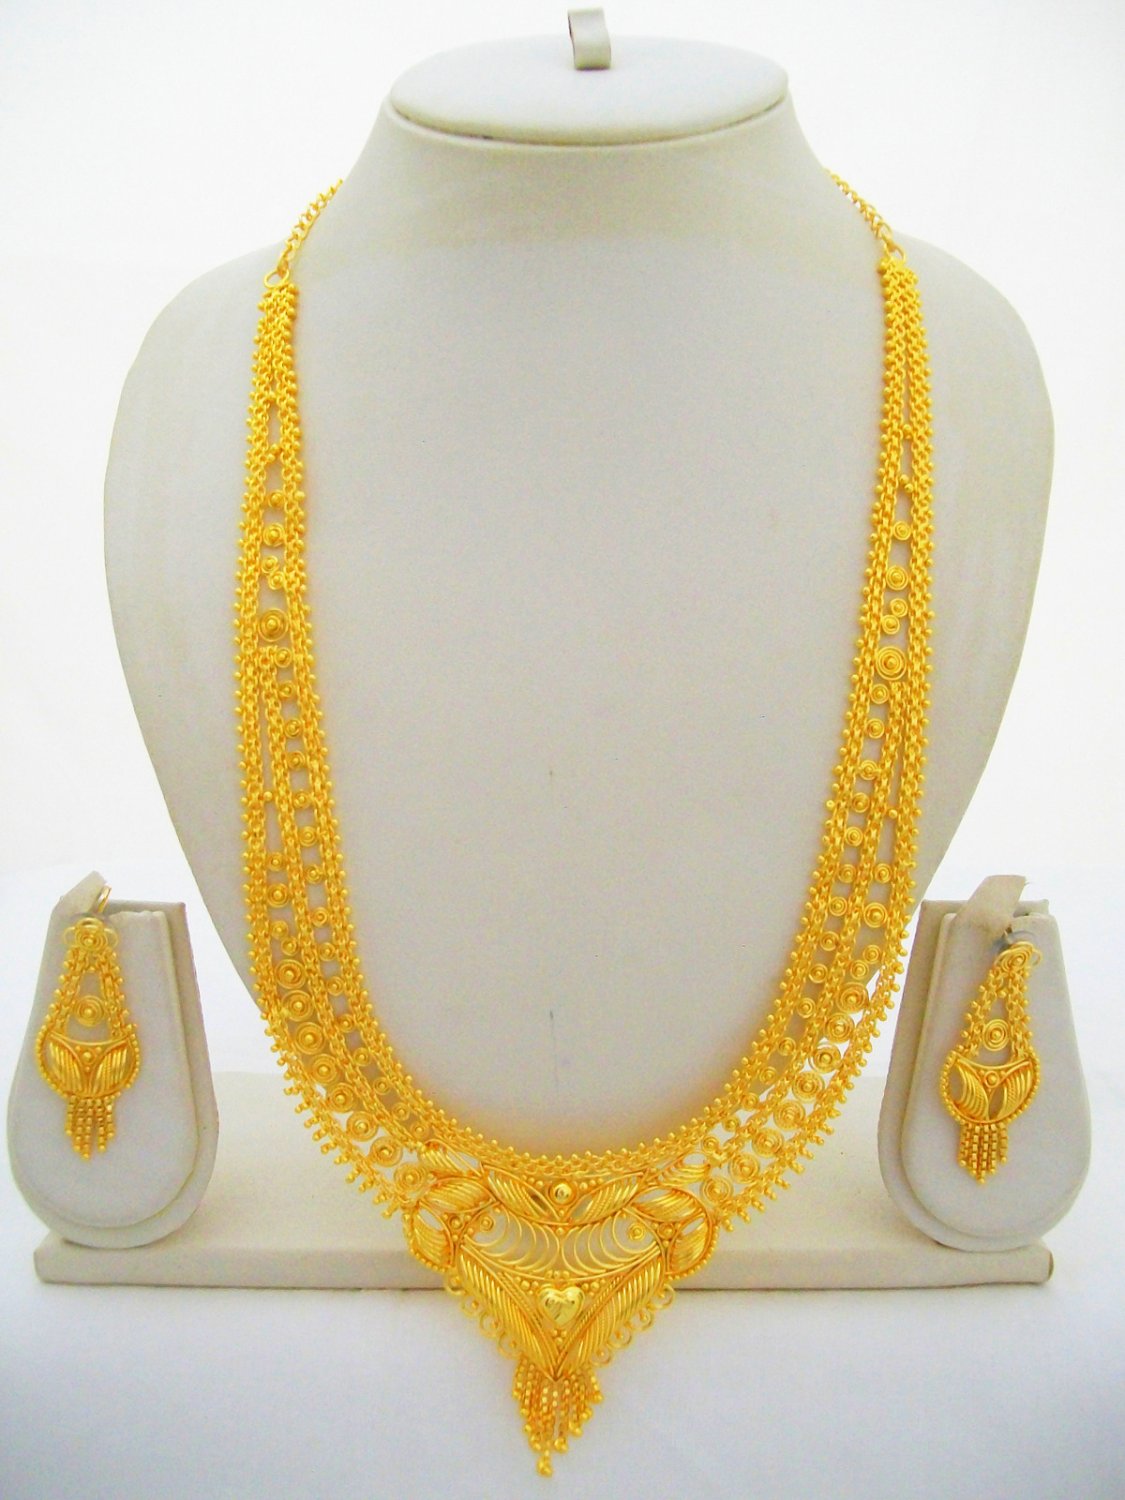 22k Gold Plated Rani Haar Indian Wedding Long Necklace Jewelry Set